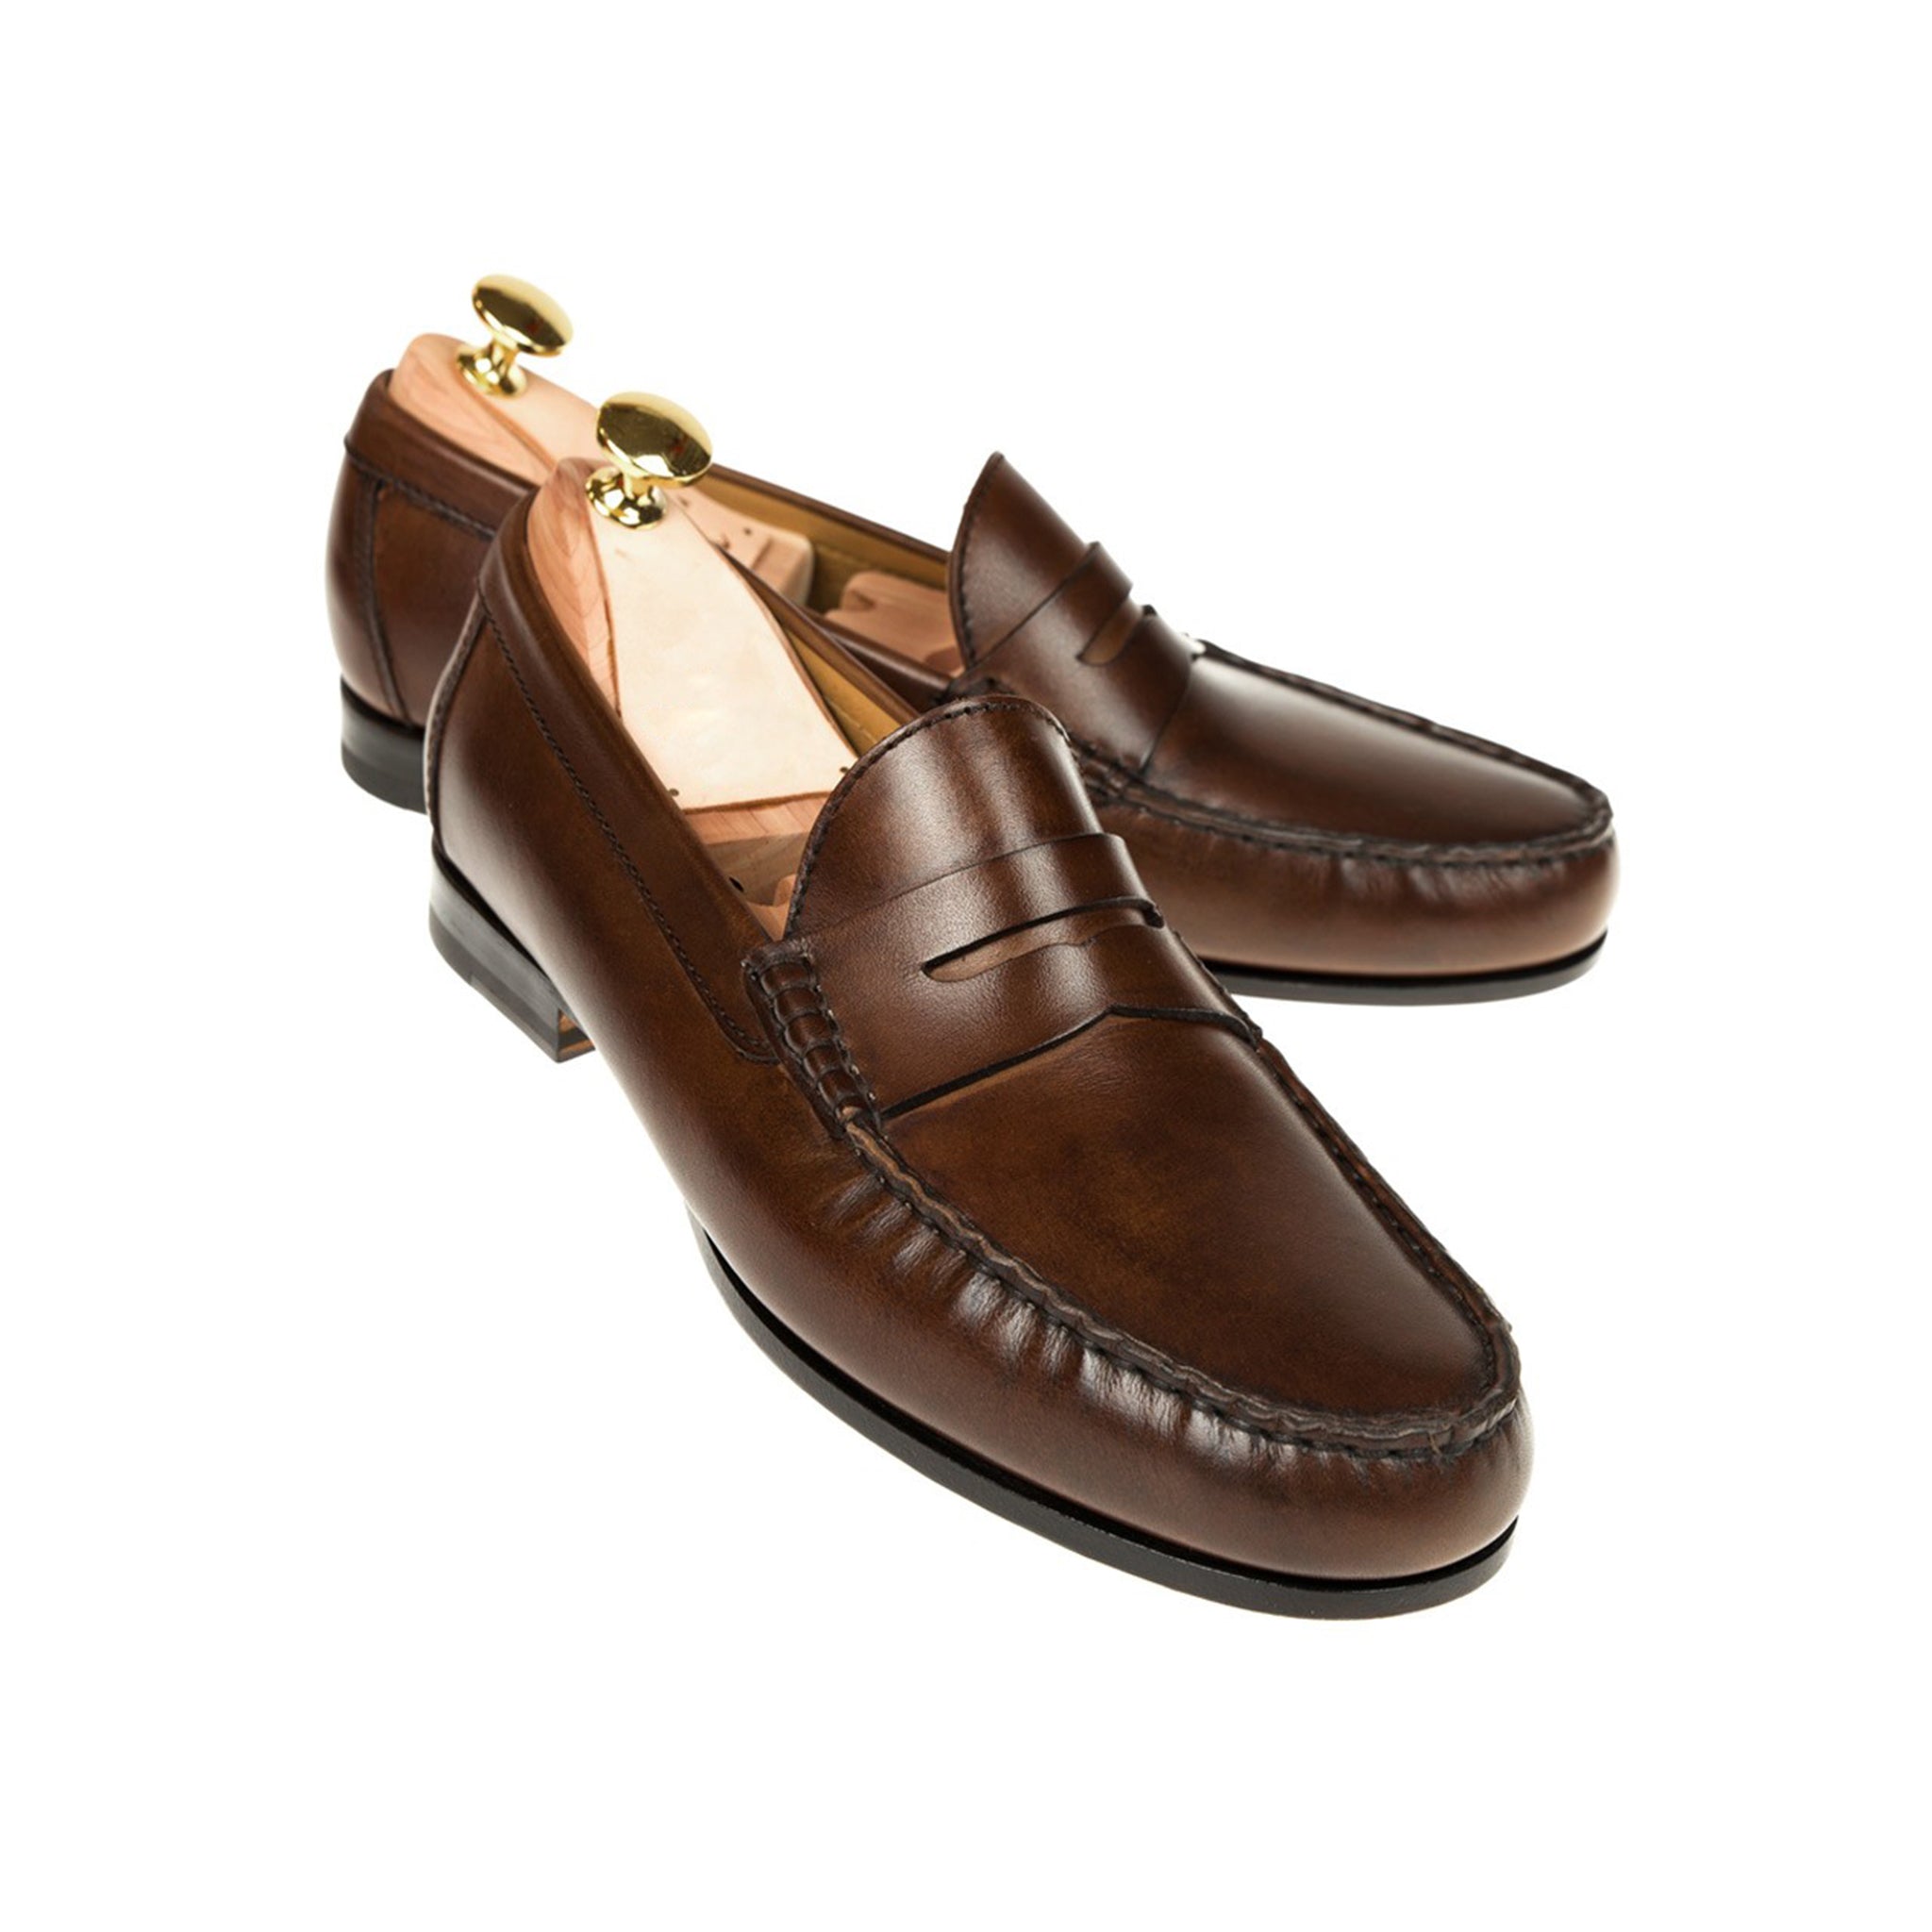 Novo Calf Leather Penny Loafer